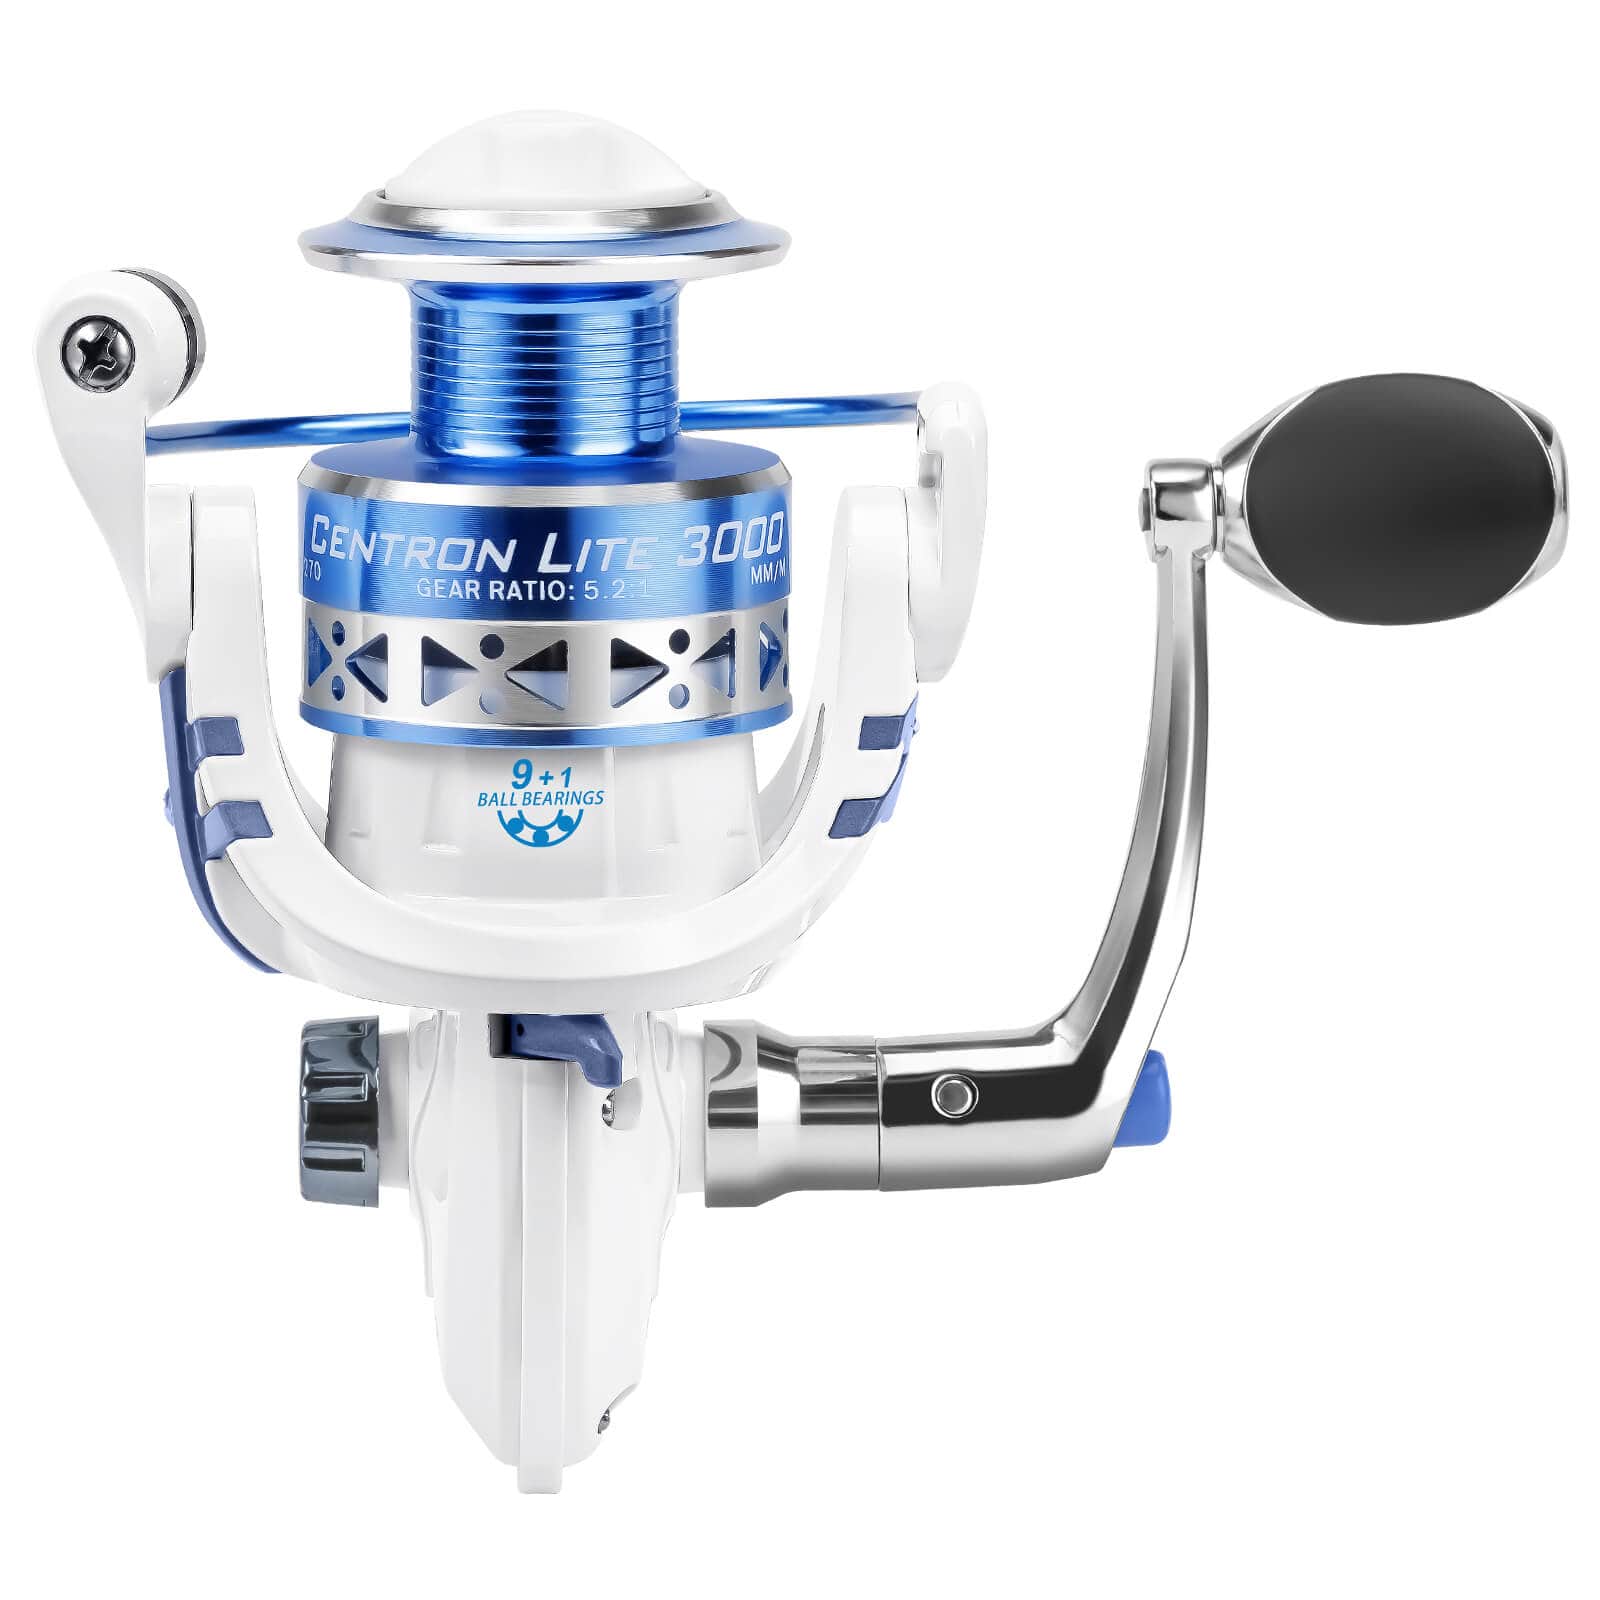 KastKing Summer Spinning Reel (White): Gear Ratio: 4:5:1 from $21